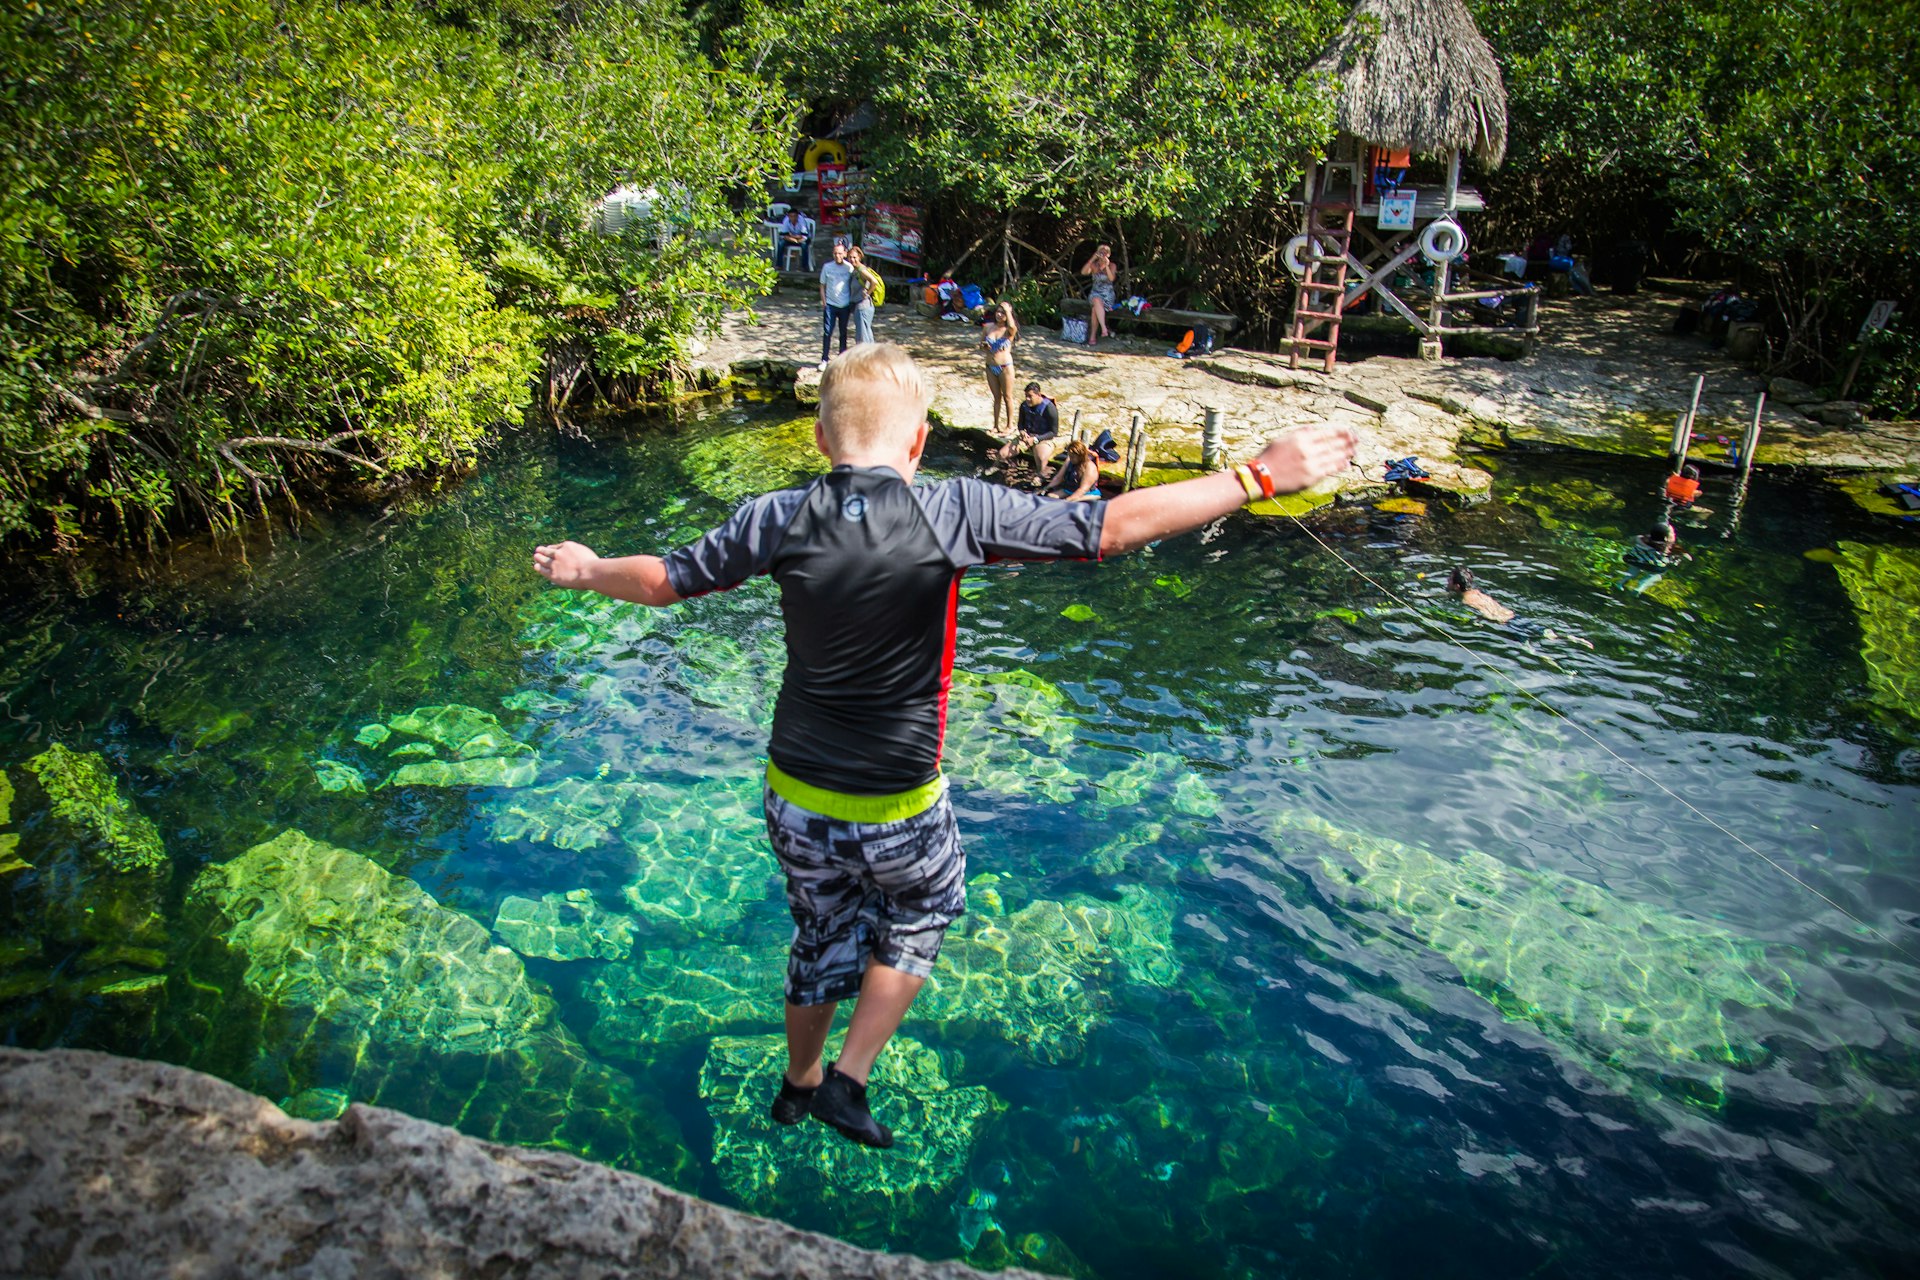 A young boy jumps off a ledge into a clear blue cenote (swimming hole)